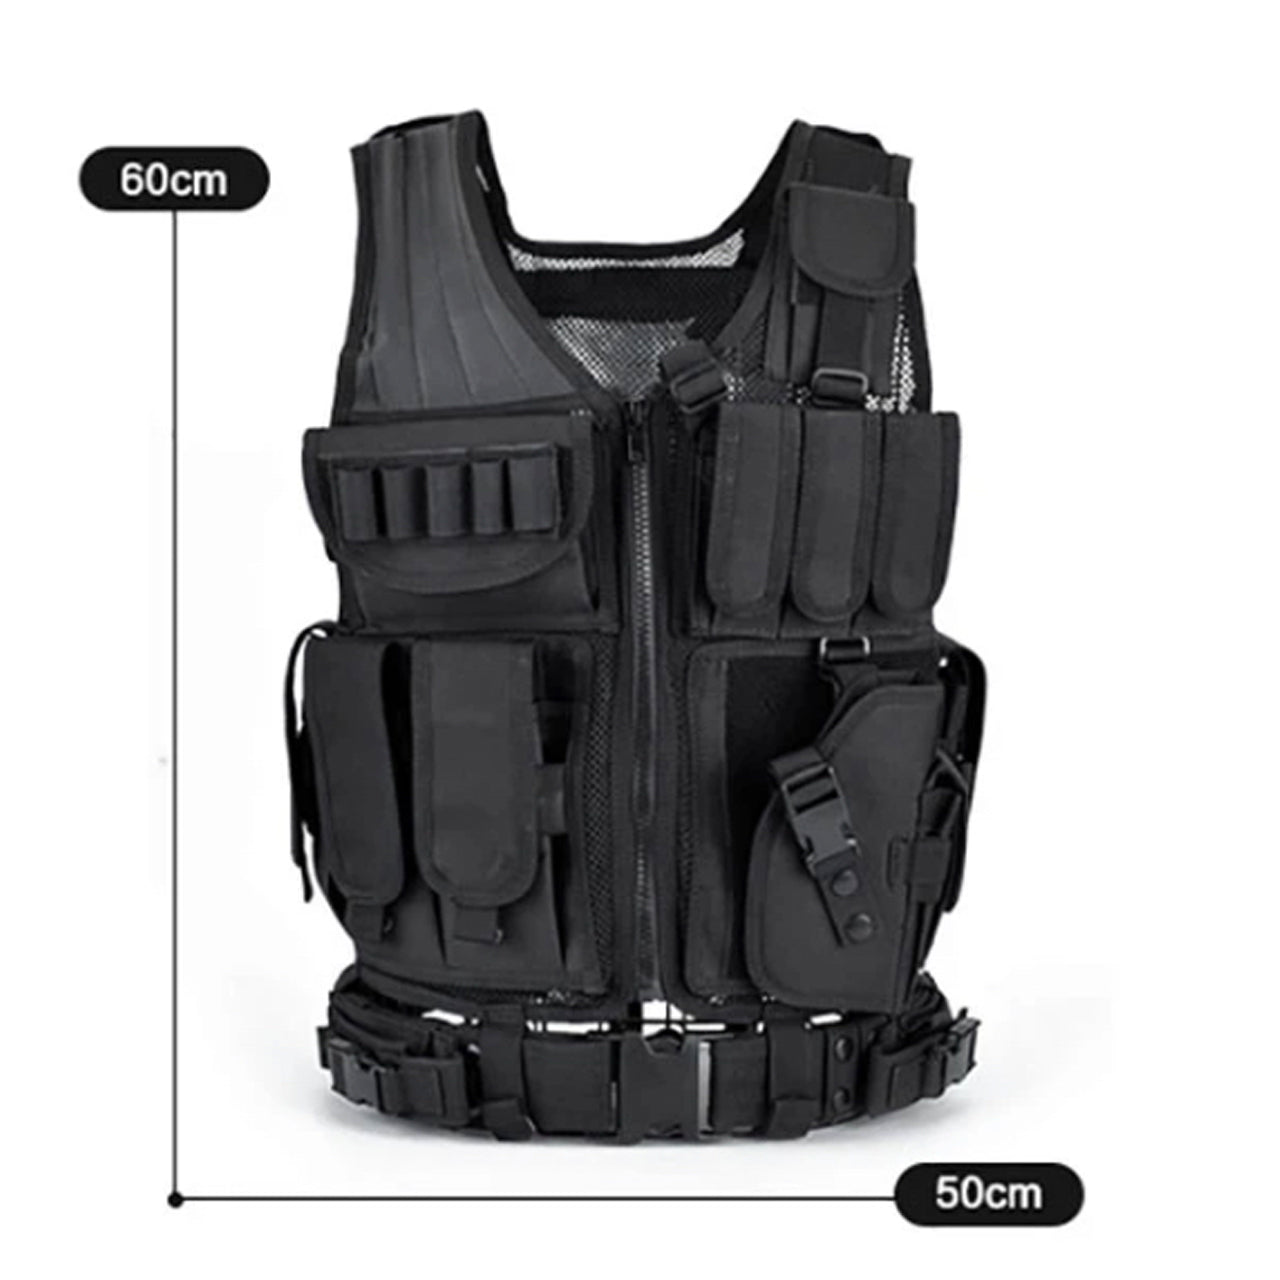 Crafted with high-density 600D polyester, strong zippers, and breathable mesh, this adjustable outdoor tactical vest is designed to be both comfortable and durable. www.moralepatches.com.au